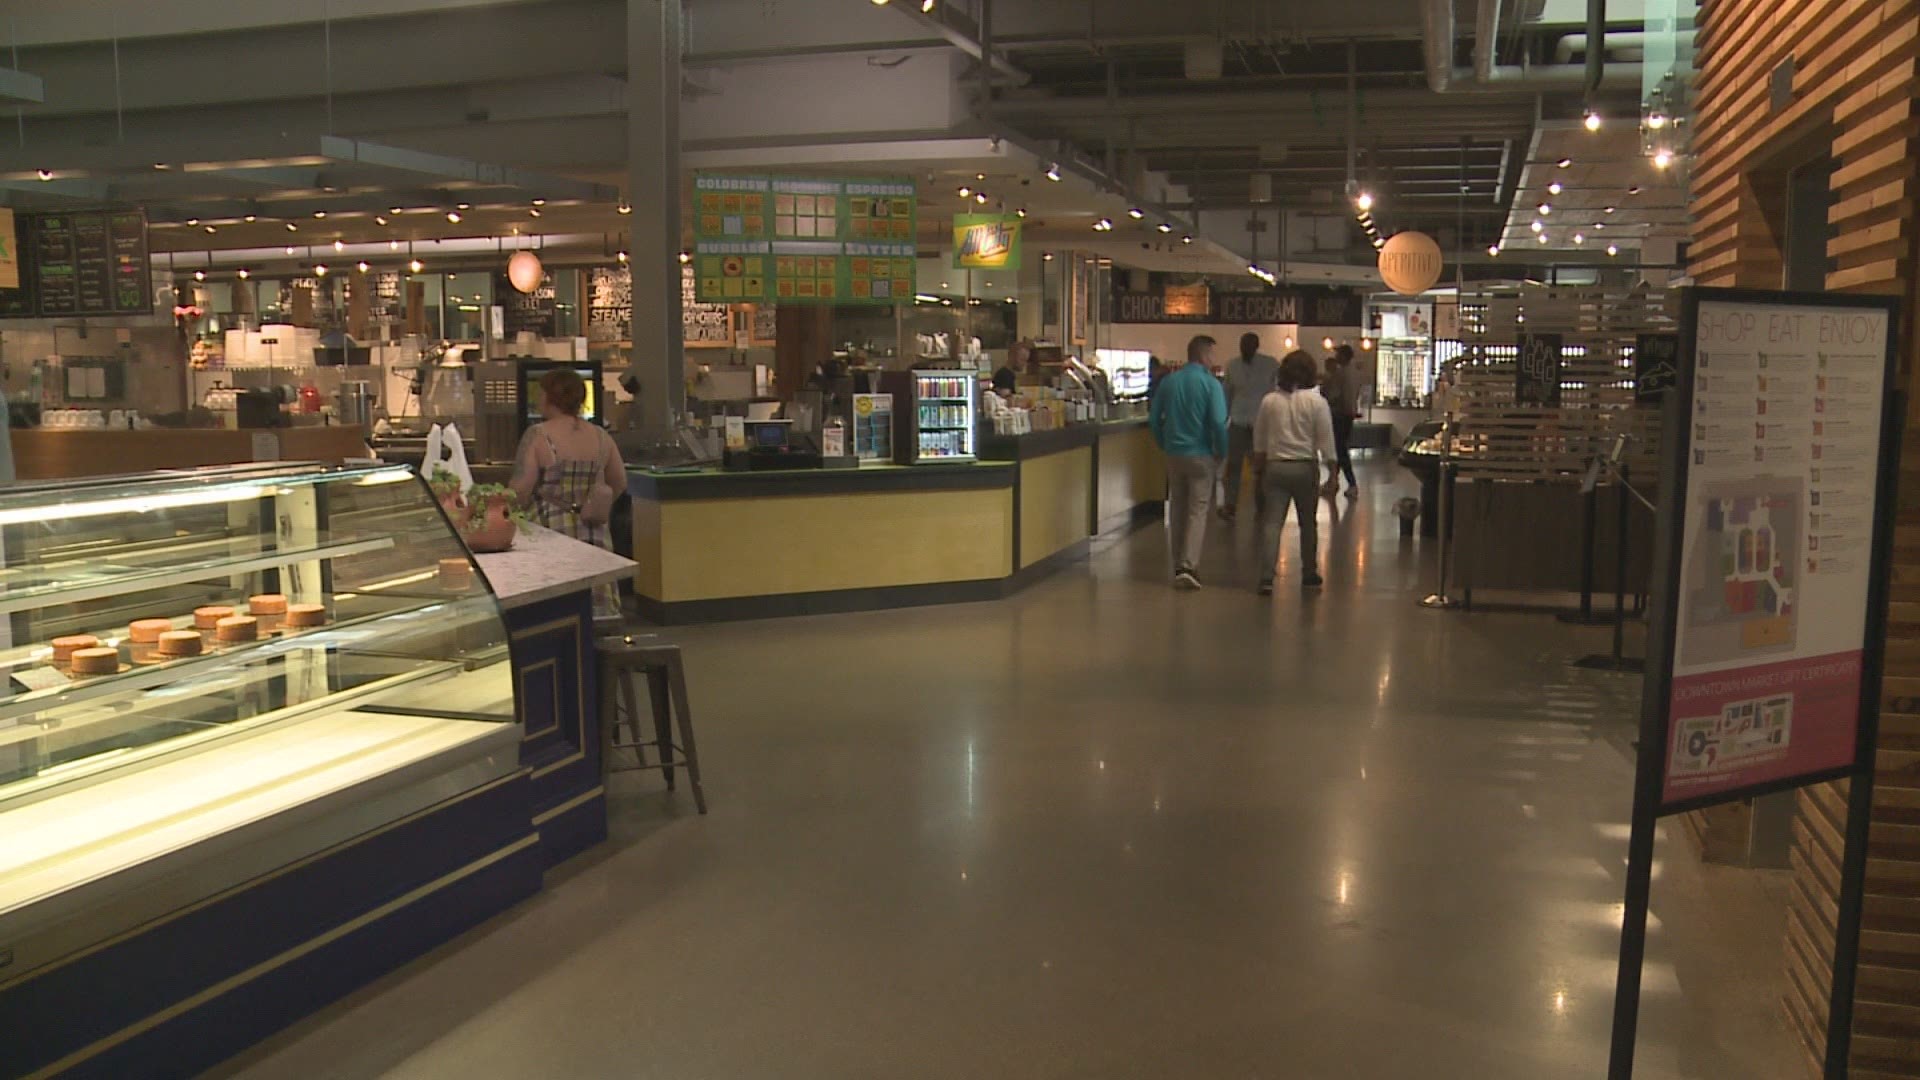 The popular Grand Rapids food marketplace is hosting a job fair for various open positions on Tuesday.